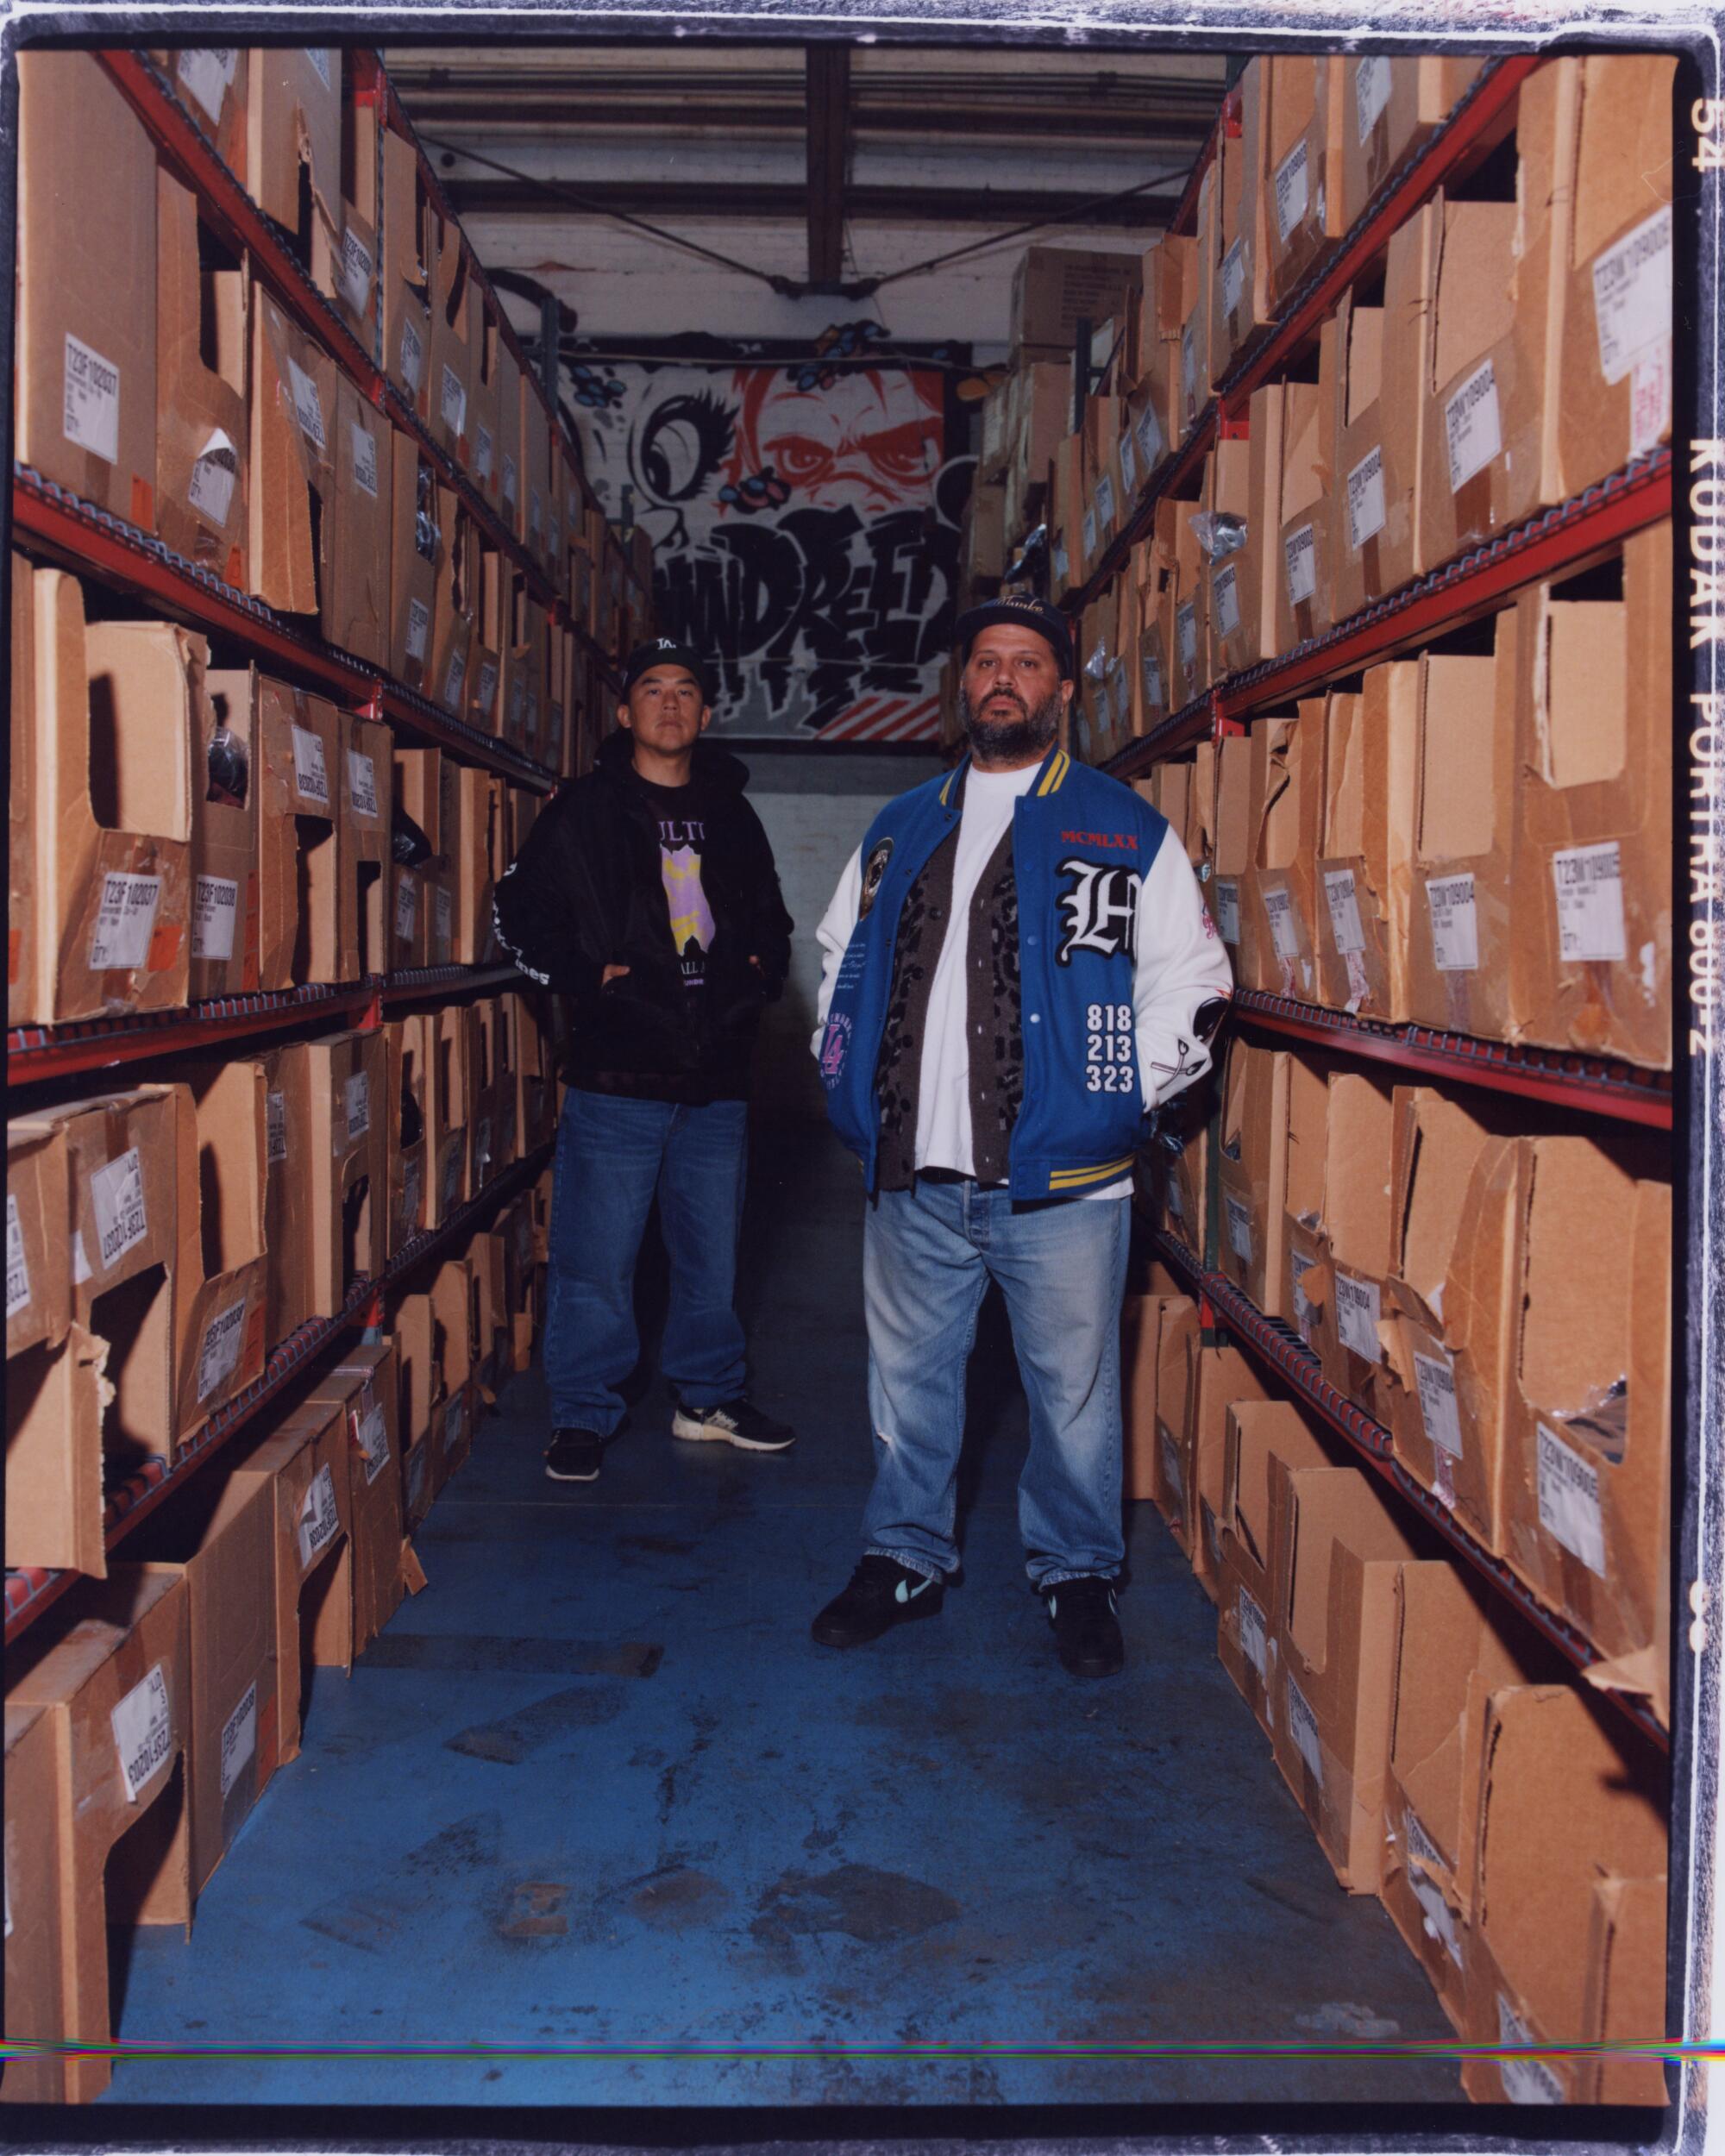 Two man stand between tall shelves filled with cardboard boxes